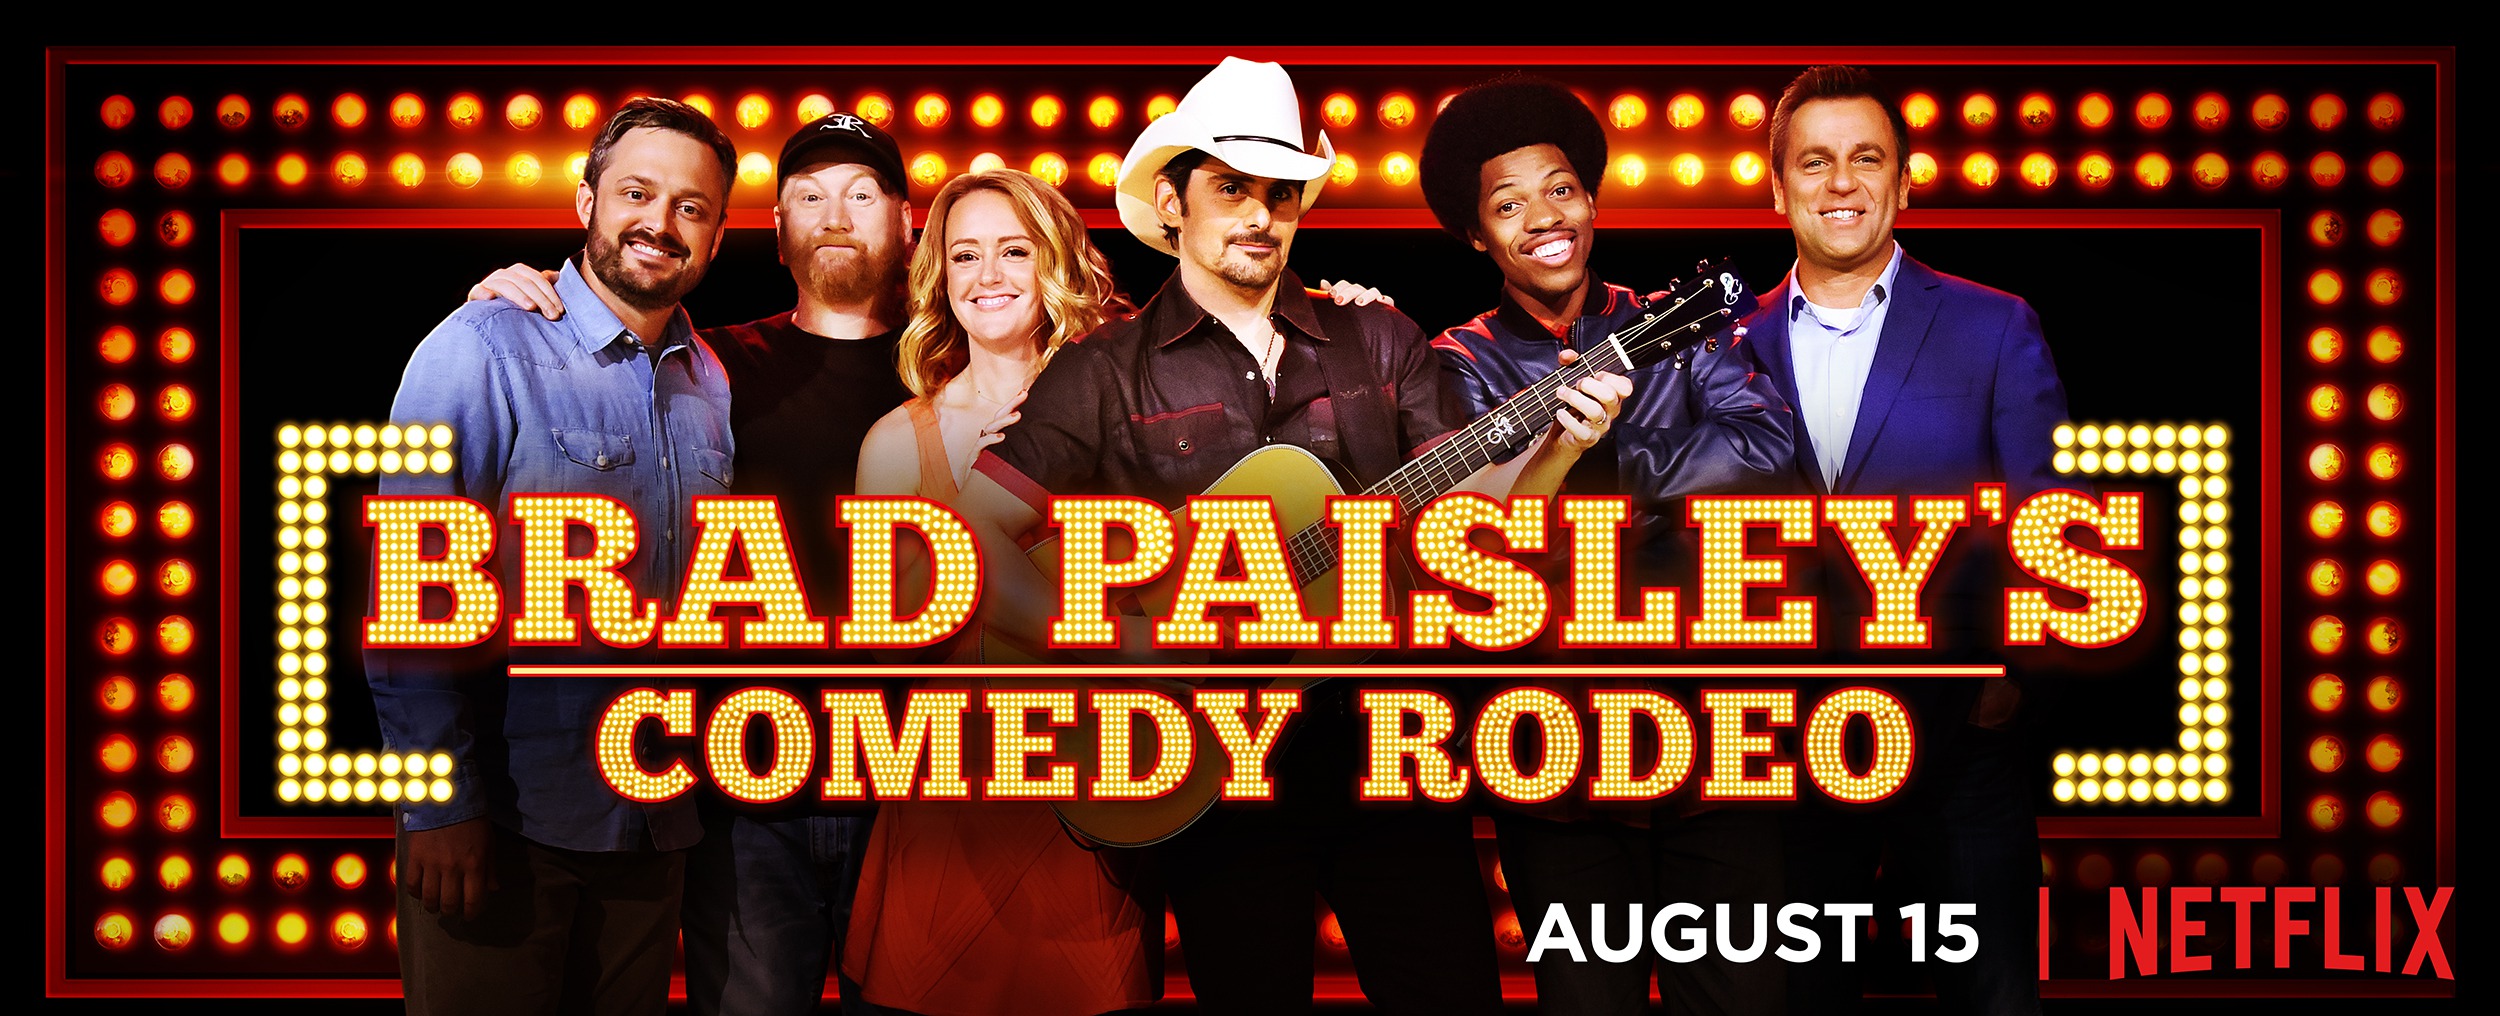 Mega Sized TV Poster Image for Brad Paisley's Comedy Rodeo 